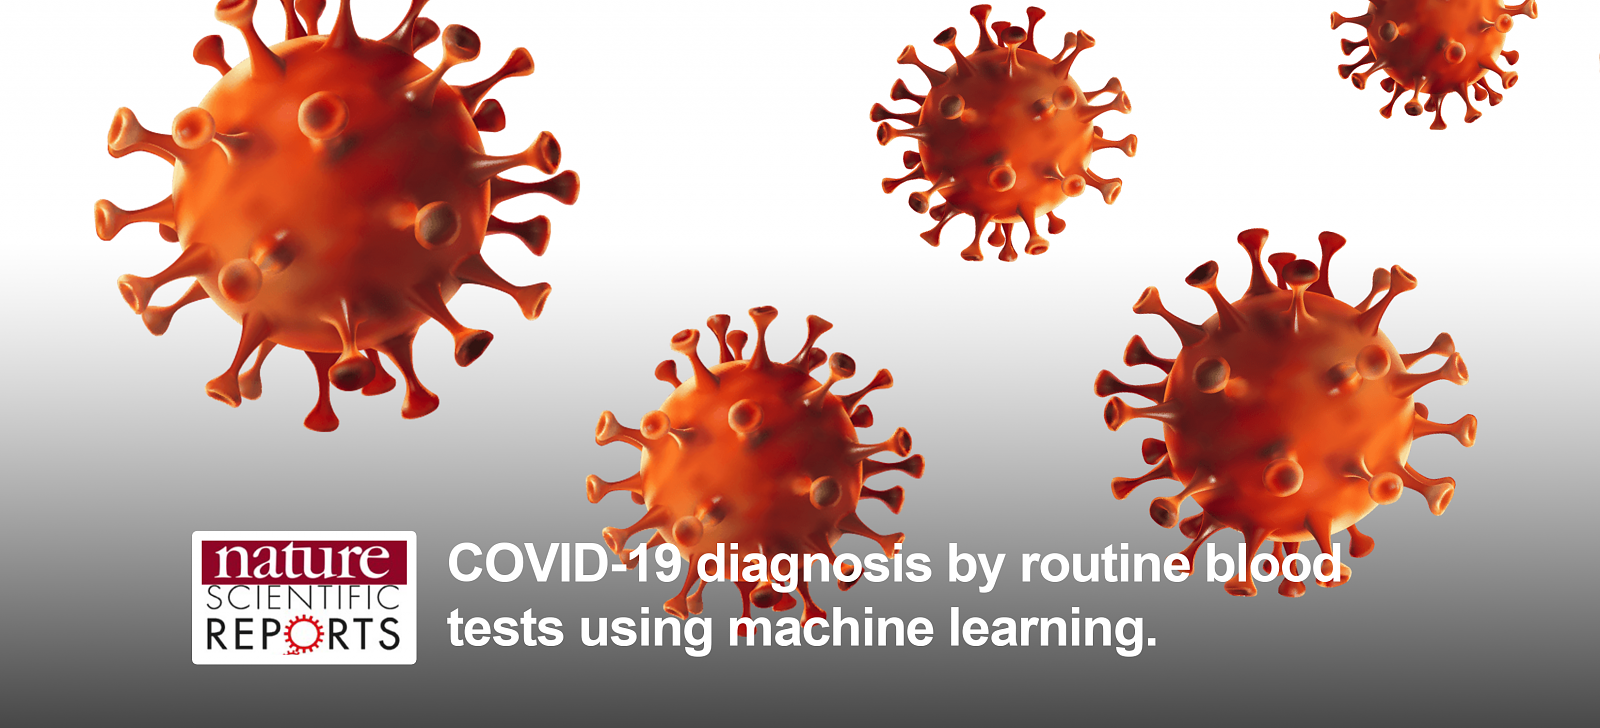 COVID-19 diagnosis by routine blood tests using machine learning